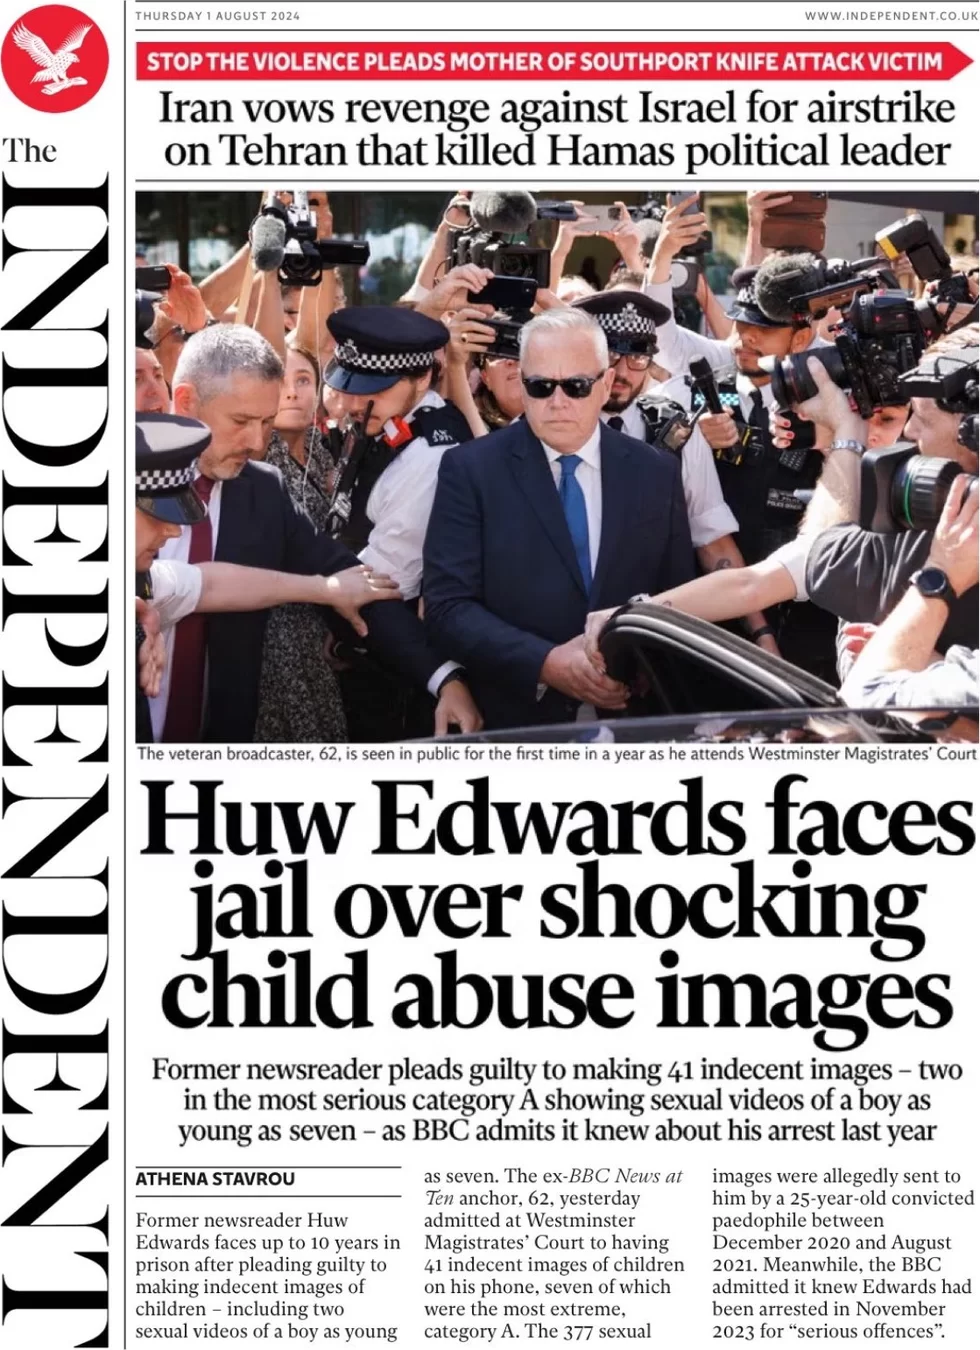 The Independent - Huw Edwards faces jail over shocking child abuse images